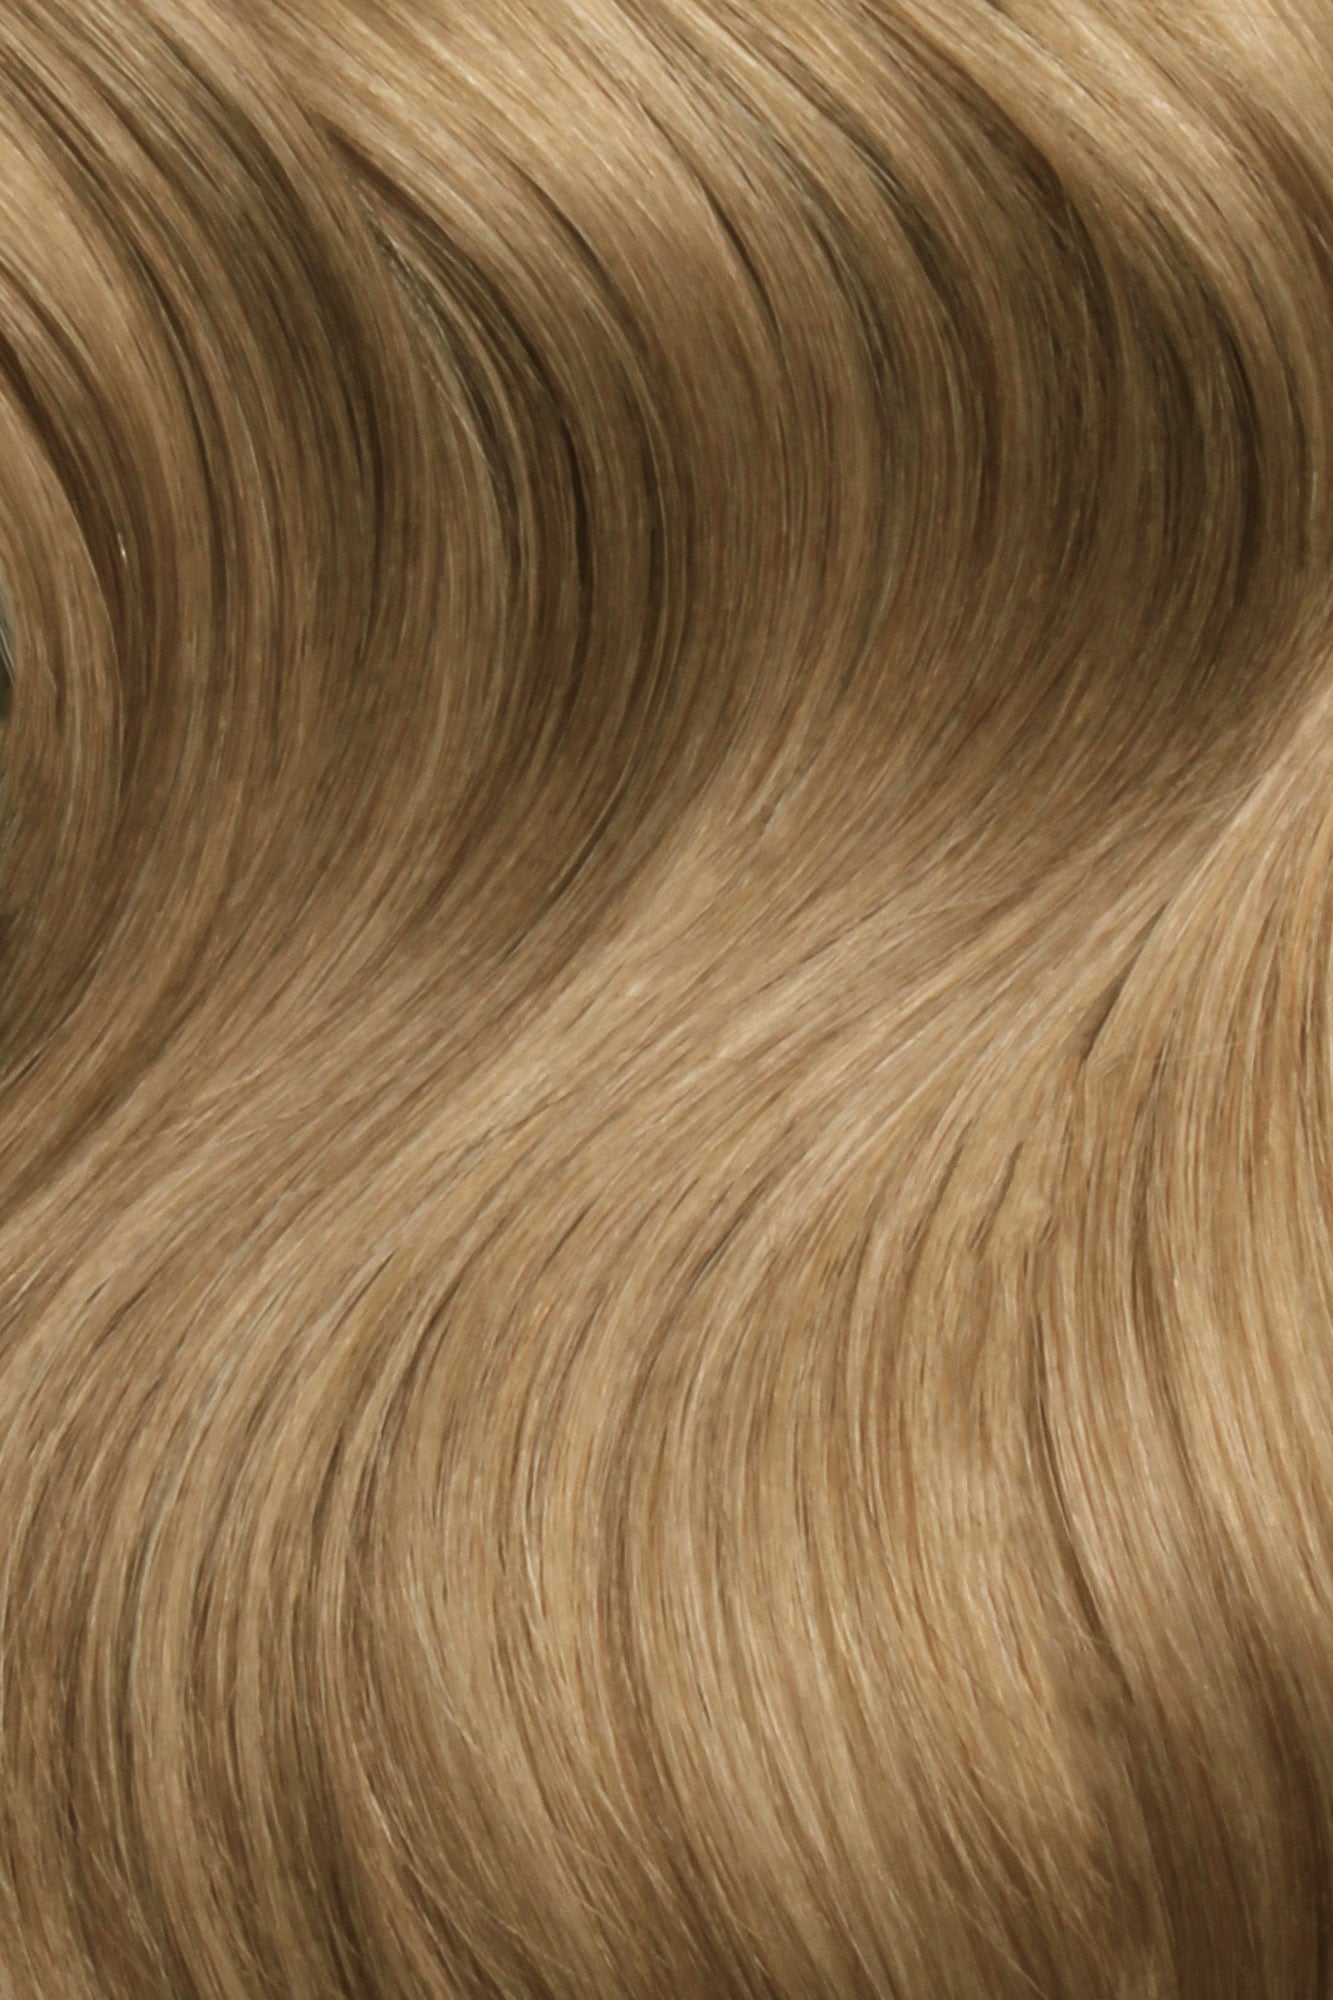 Tiny Tip Bonds 18&quot; -  SWAY Hair Extensions Champagne-Chestnut: Lightweight, discreet. Made with Italian Keratin for comfort and long-lasting wear. Reusable and compatible with other SWAY Salon Professional Methods